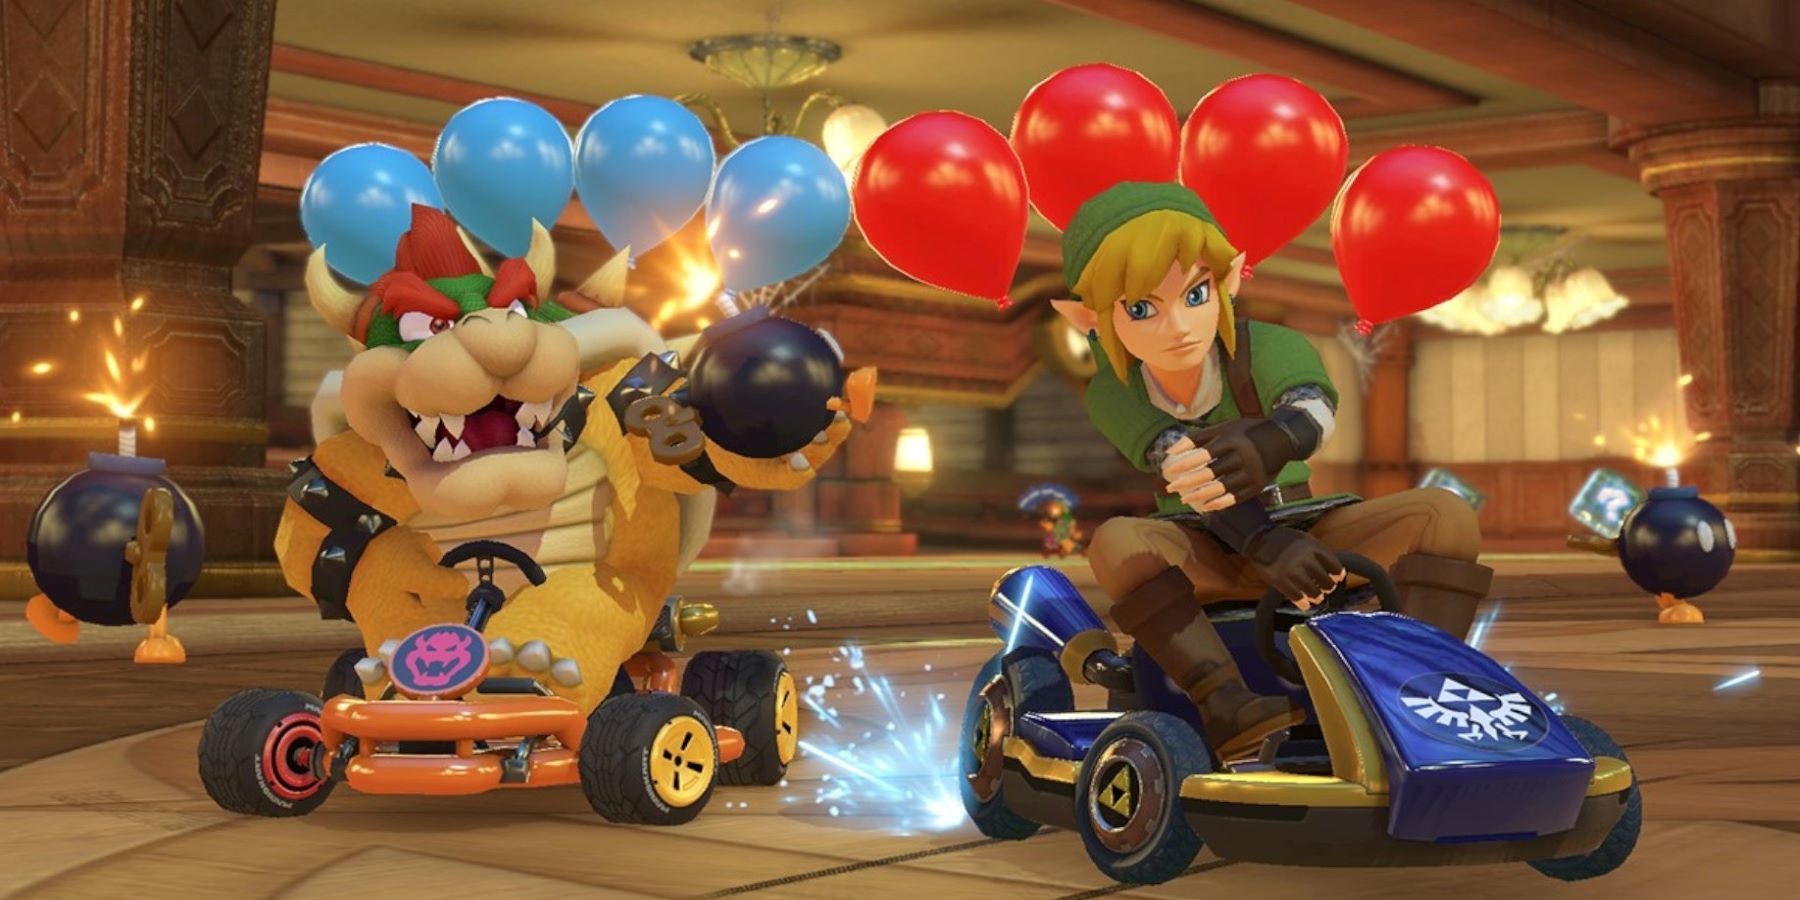 Bowser throwing a Bob-Omb at Link in Mario Kart 8 Deluxe's Battle Mode